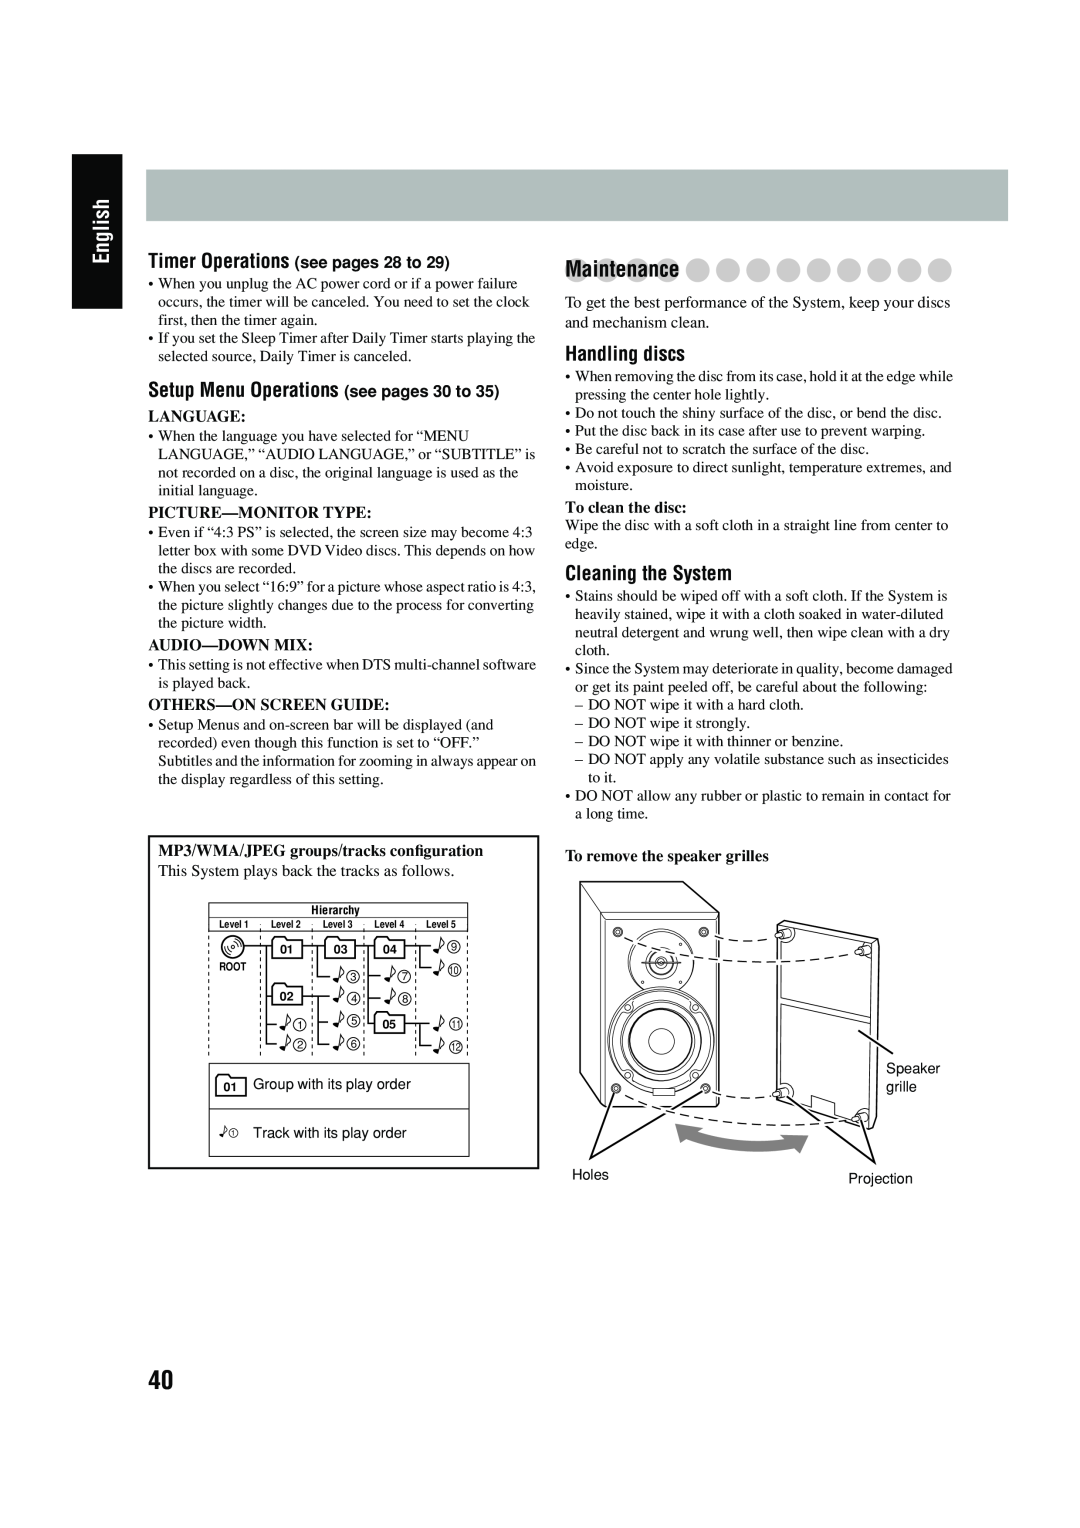 JVC FS-P550 Maintenance, Setup Menu Operations see pages 30 to, Handling discs, Cleaning the System, Language, English 